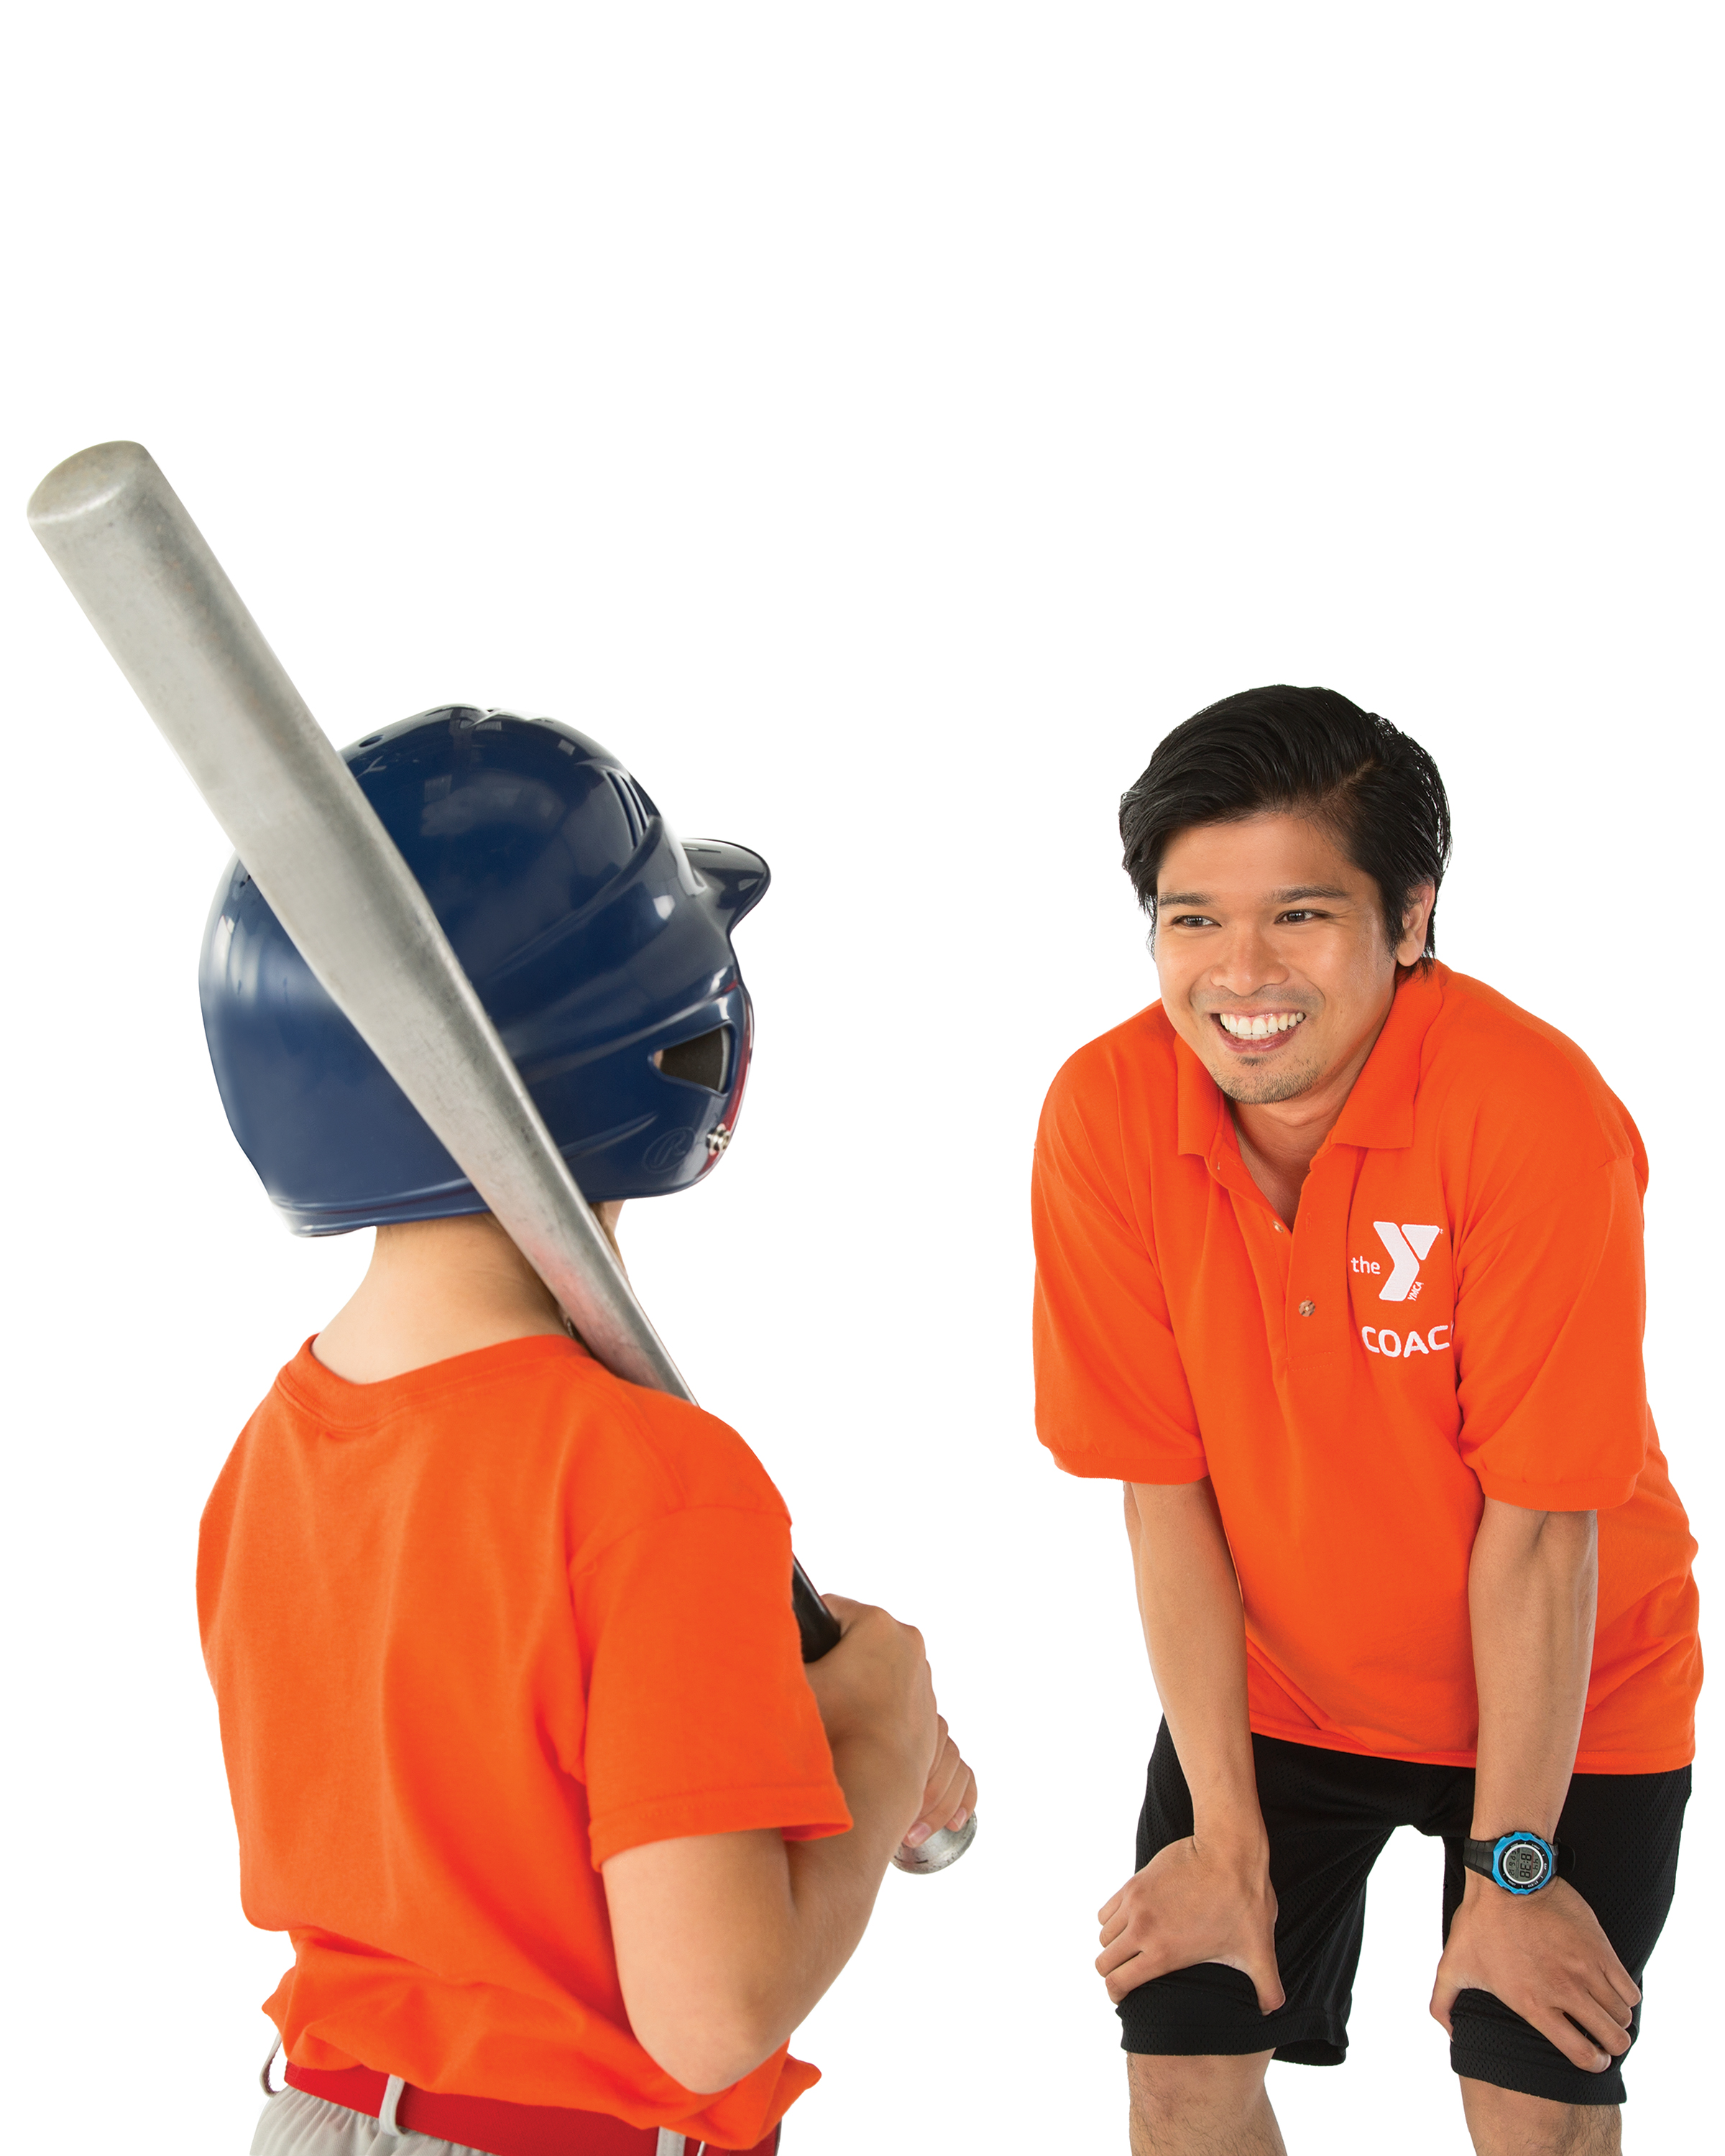 A child with his back to the camera holding a baseball bat, a man smiling and giving him instruction